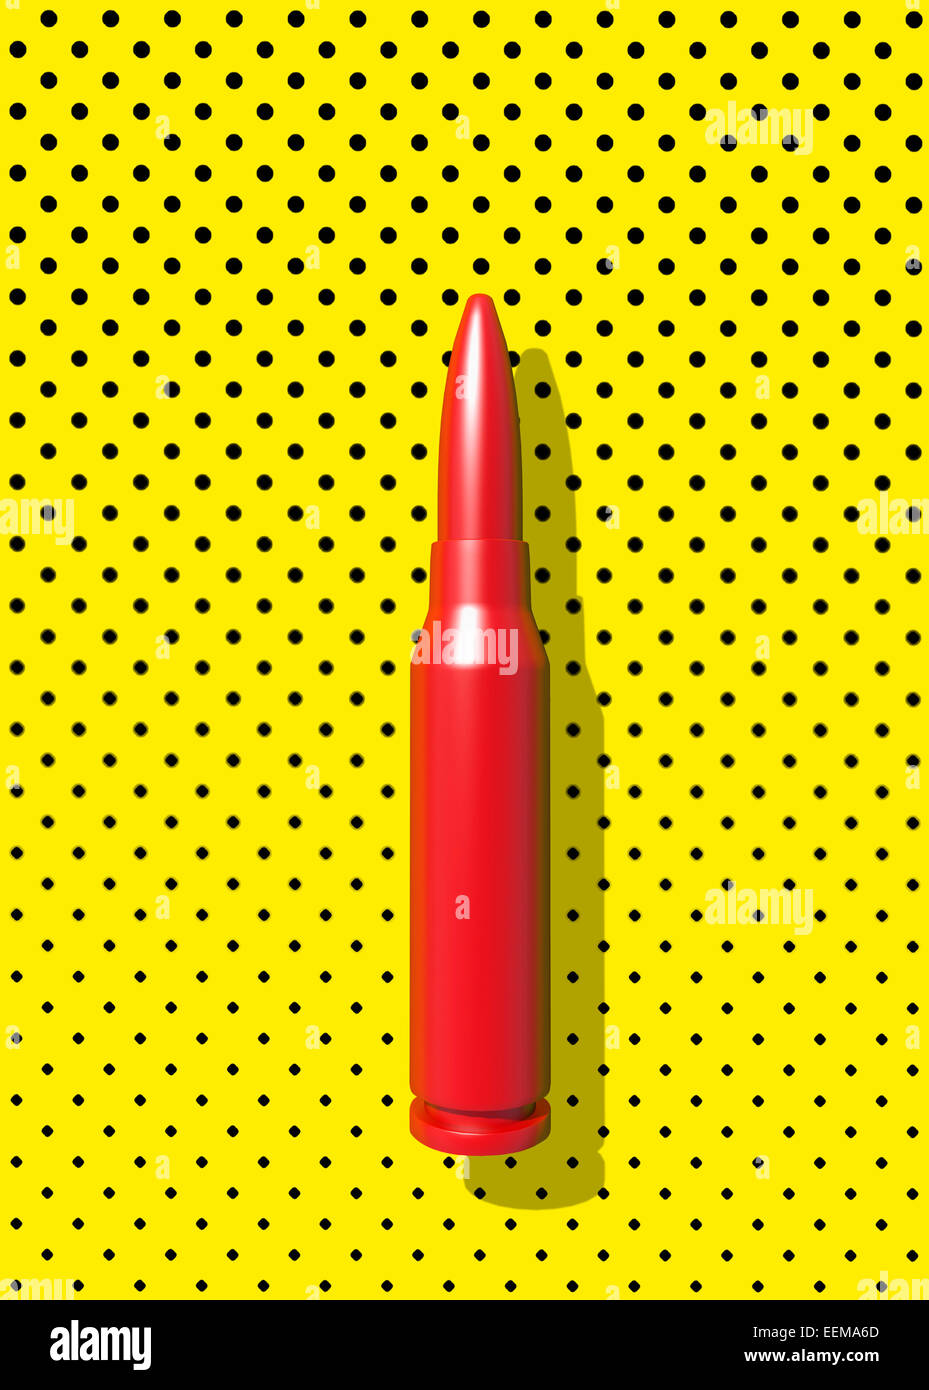 Close up of red bullet casing on polka dot background Stock Photo